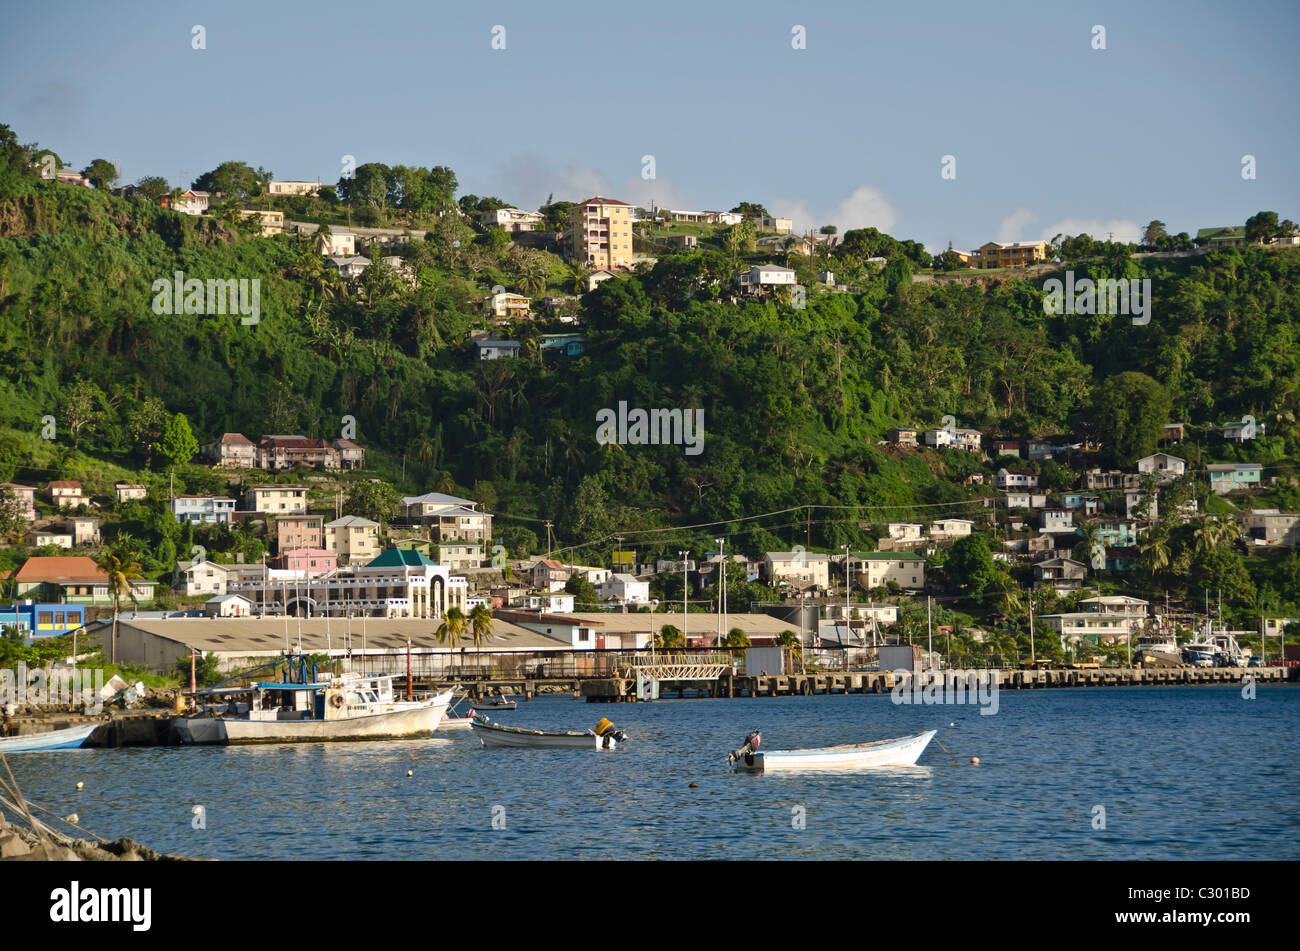 St Vincent Kingstown harbor fishing boats and city landscape Stock Photo